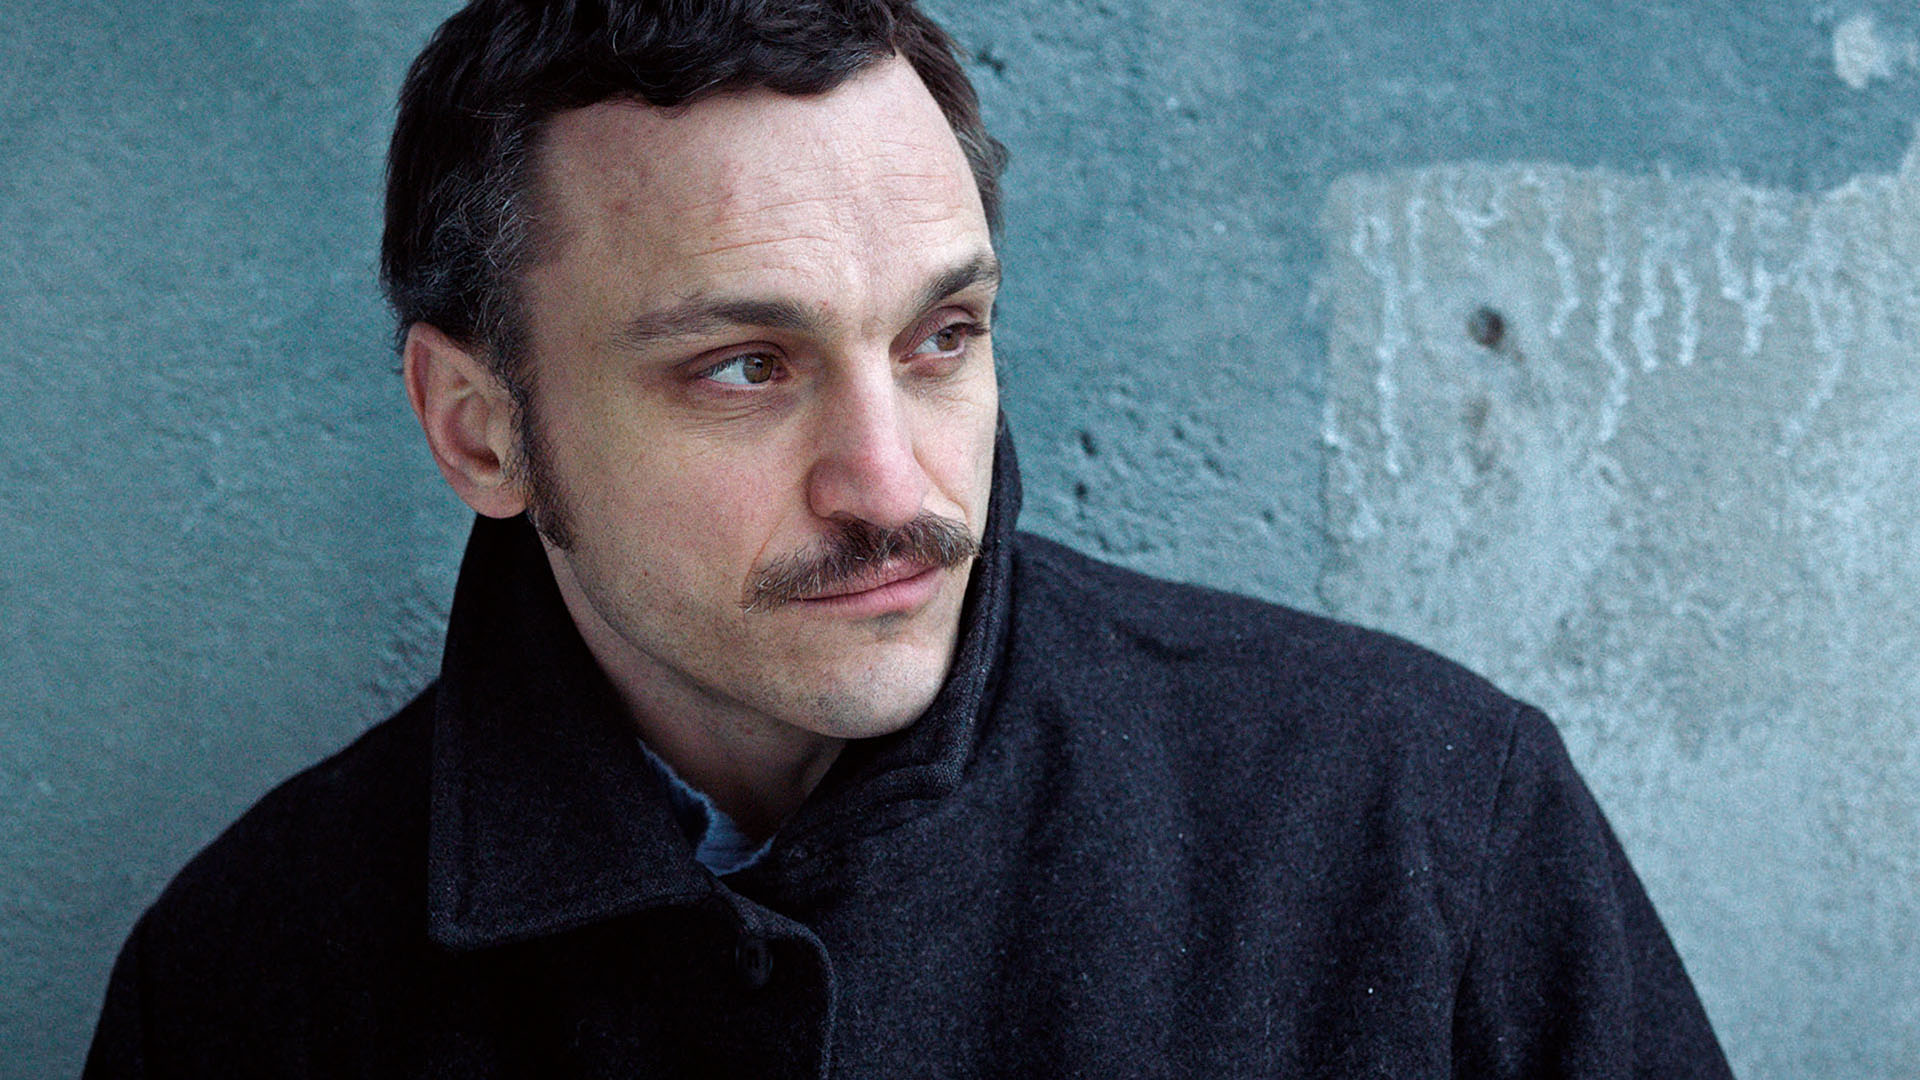 After starring in the last two films by German director Christian Petzold, Rogowski is consecrated in "great freedom".